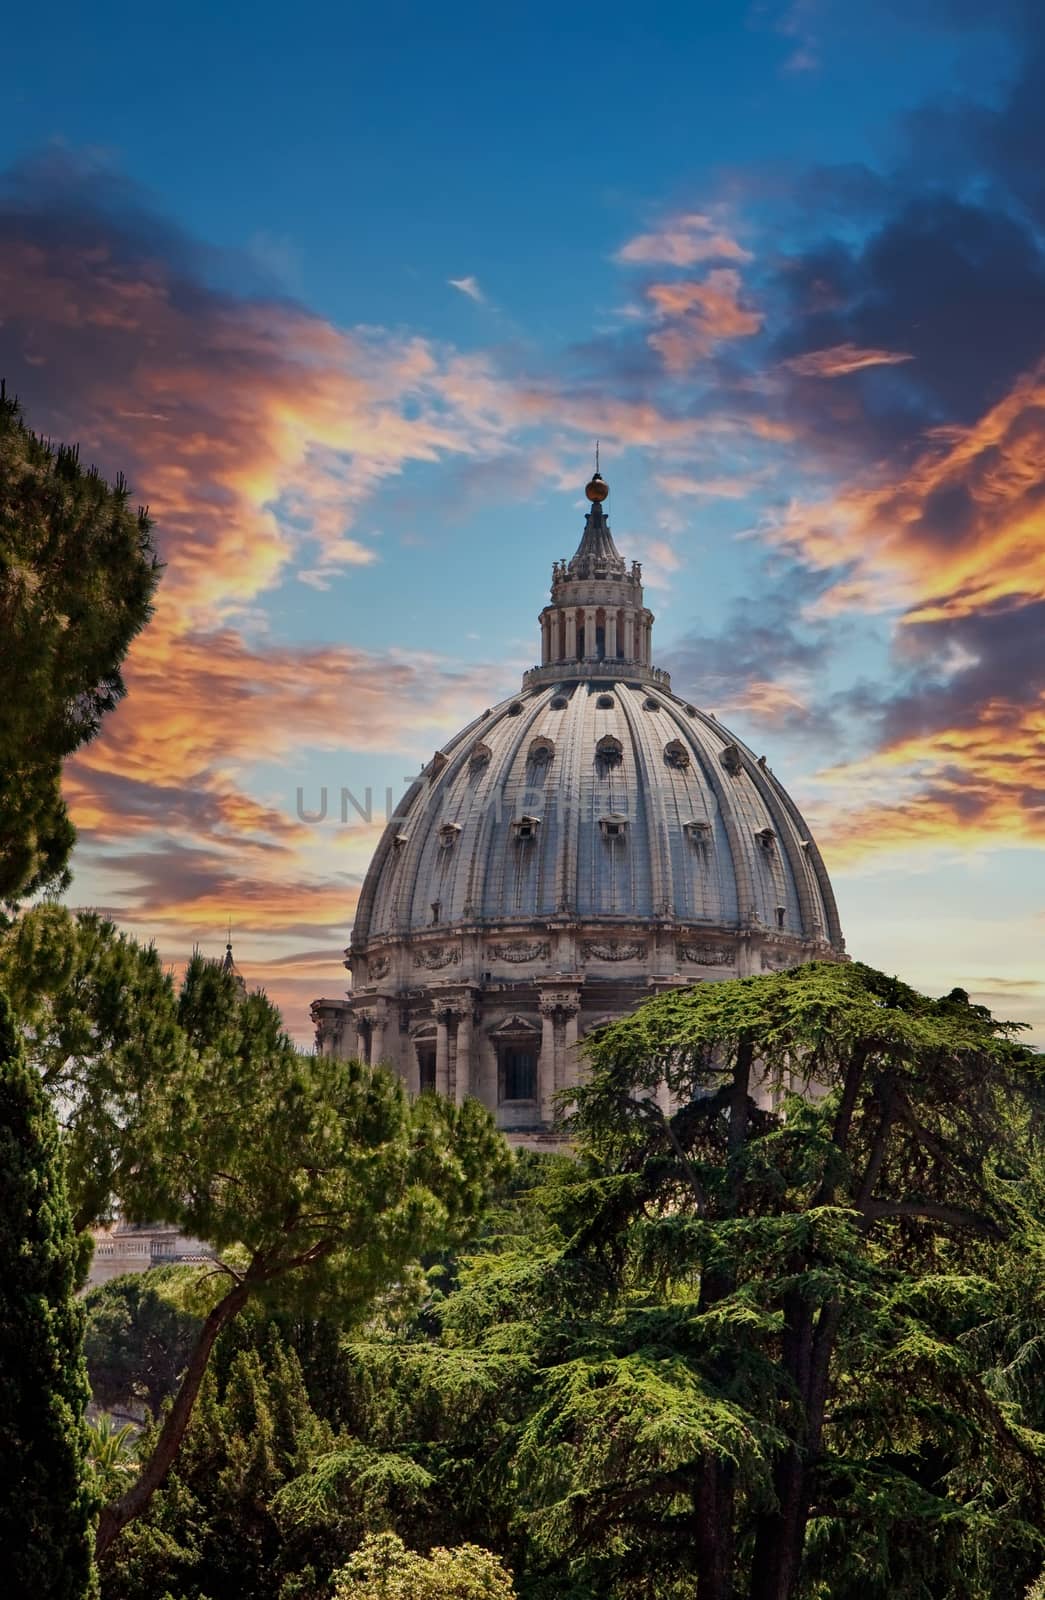 Dome of St. Peters Basilica in the Vatican, Rome, Italy